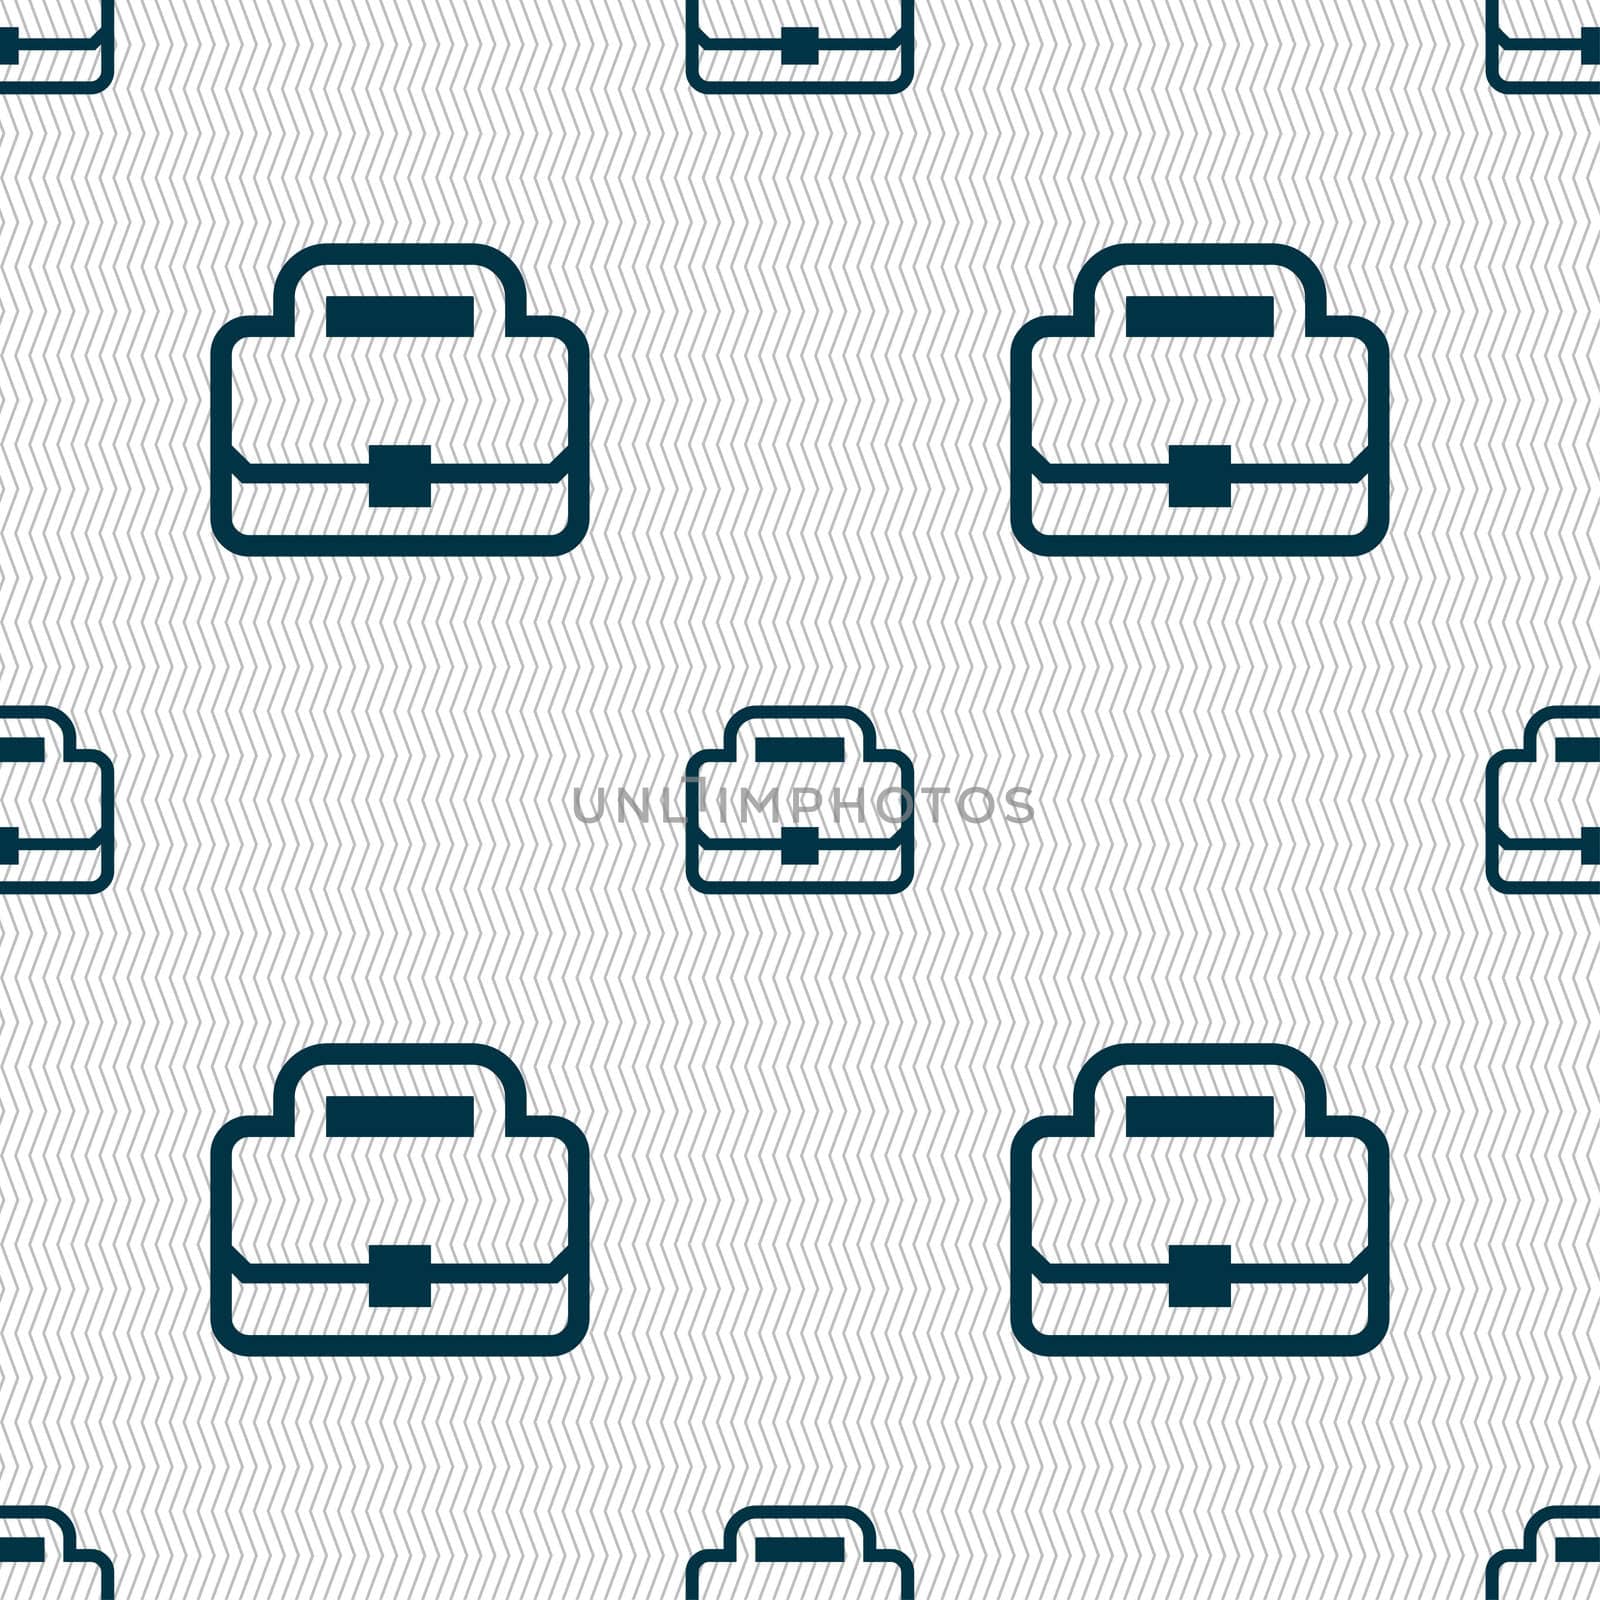 Briefcase icon sign. Seamless pattern with geometric texture. illustration